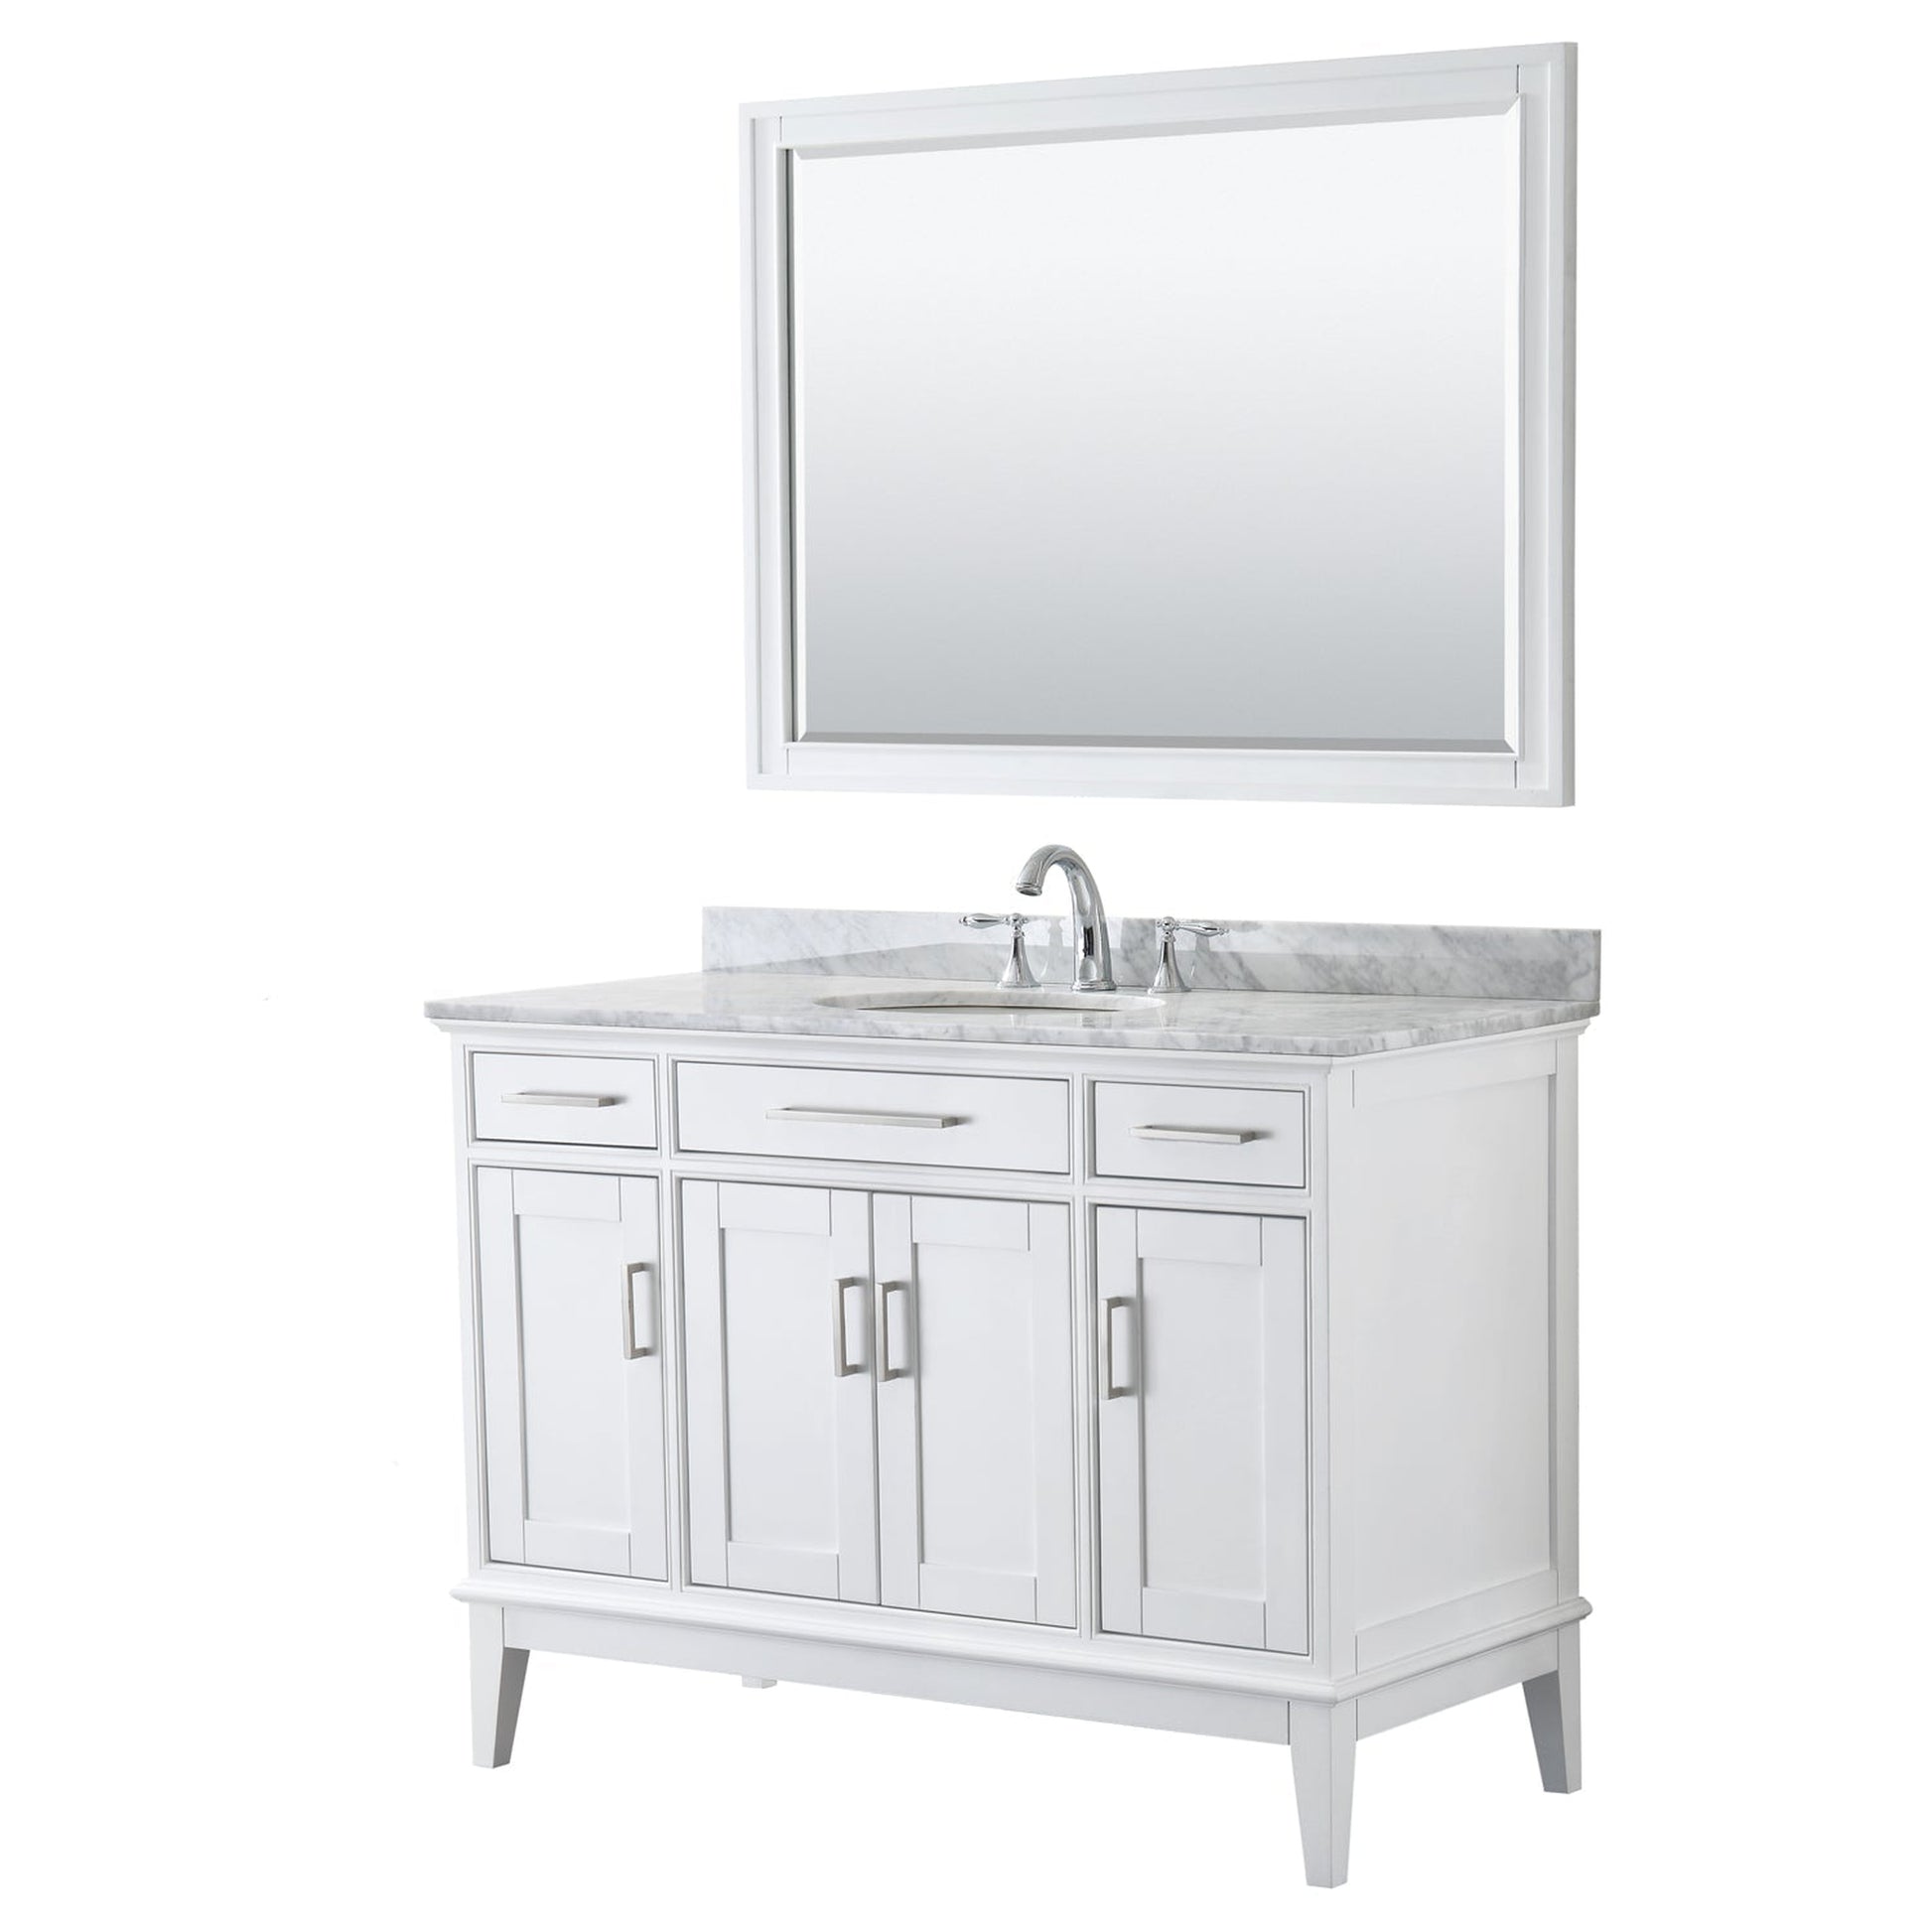 Wyndham Collection Margate 48" Single Bathroom White Vanity With White Carrara Marble Countertop, Undermount Oval Sink And 44" Mirror